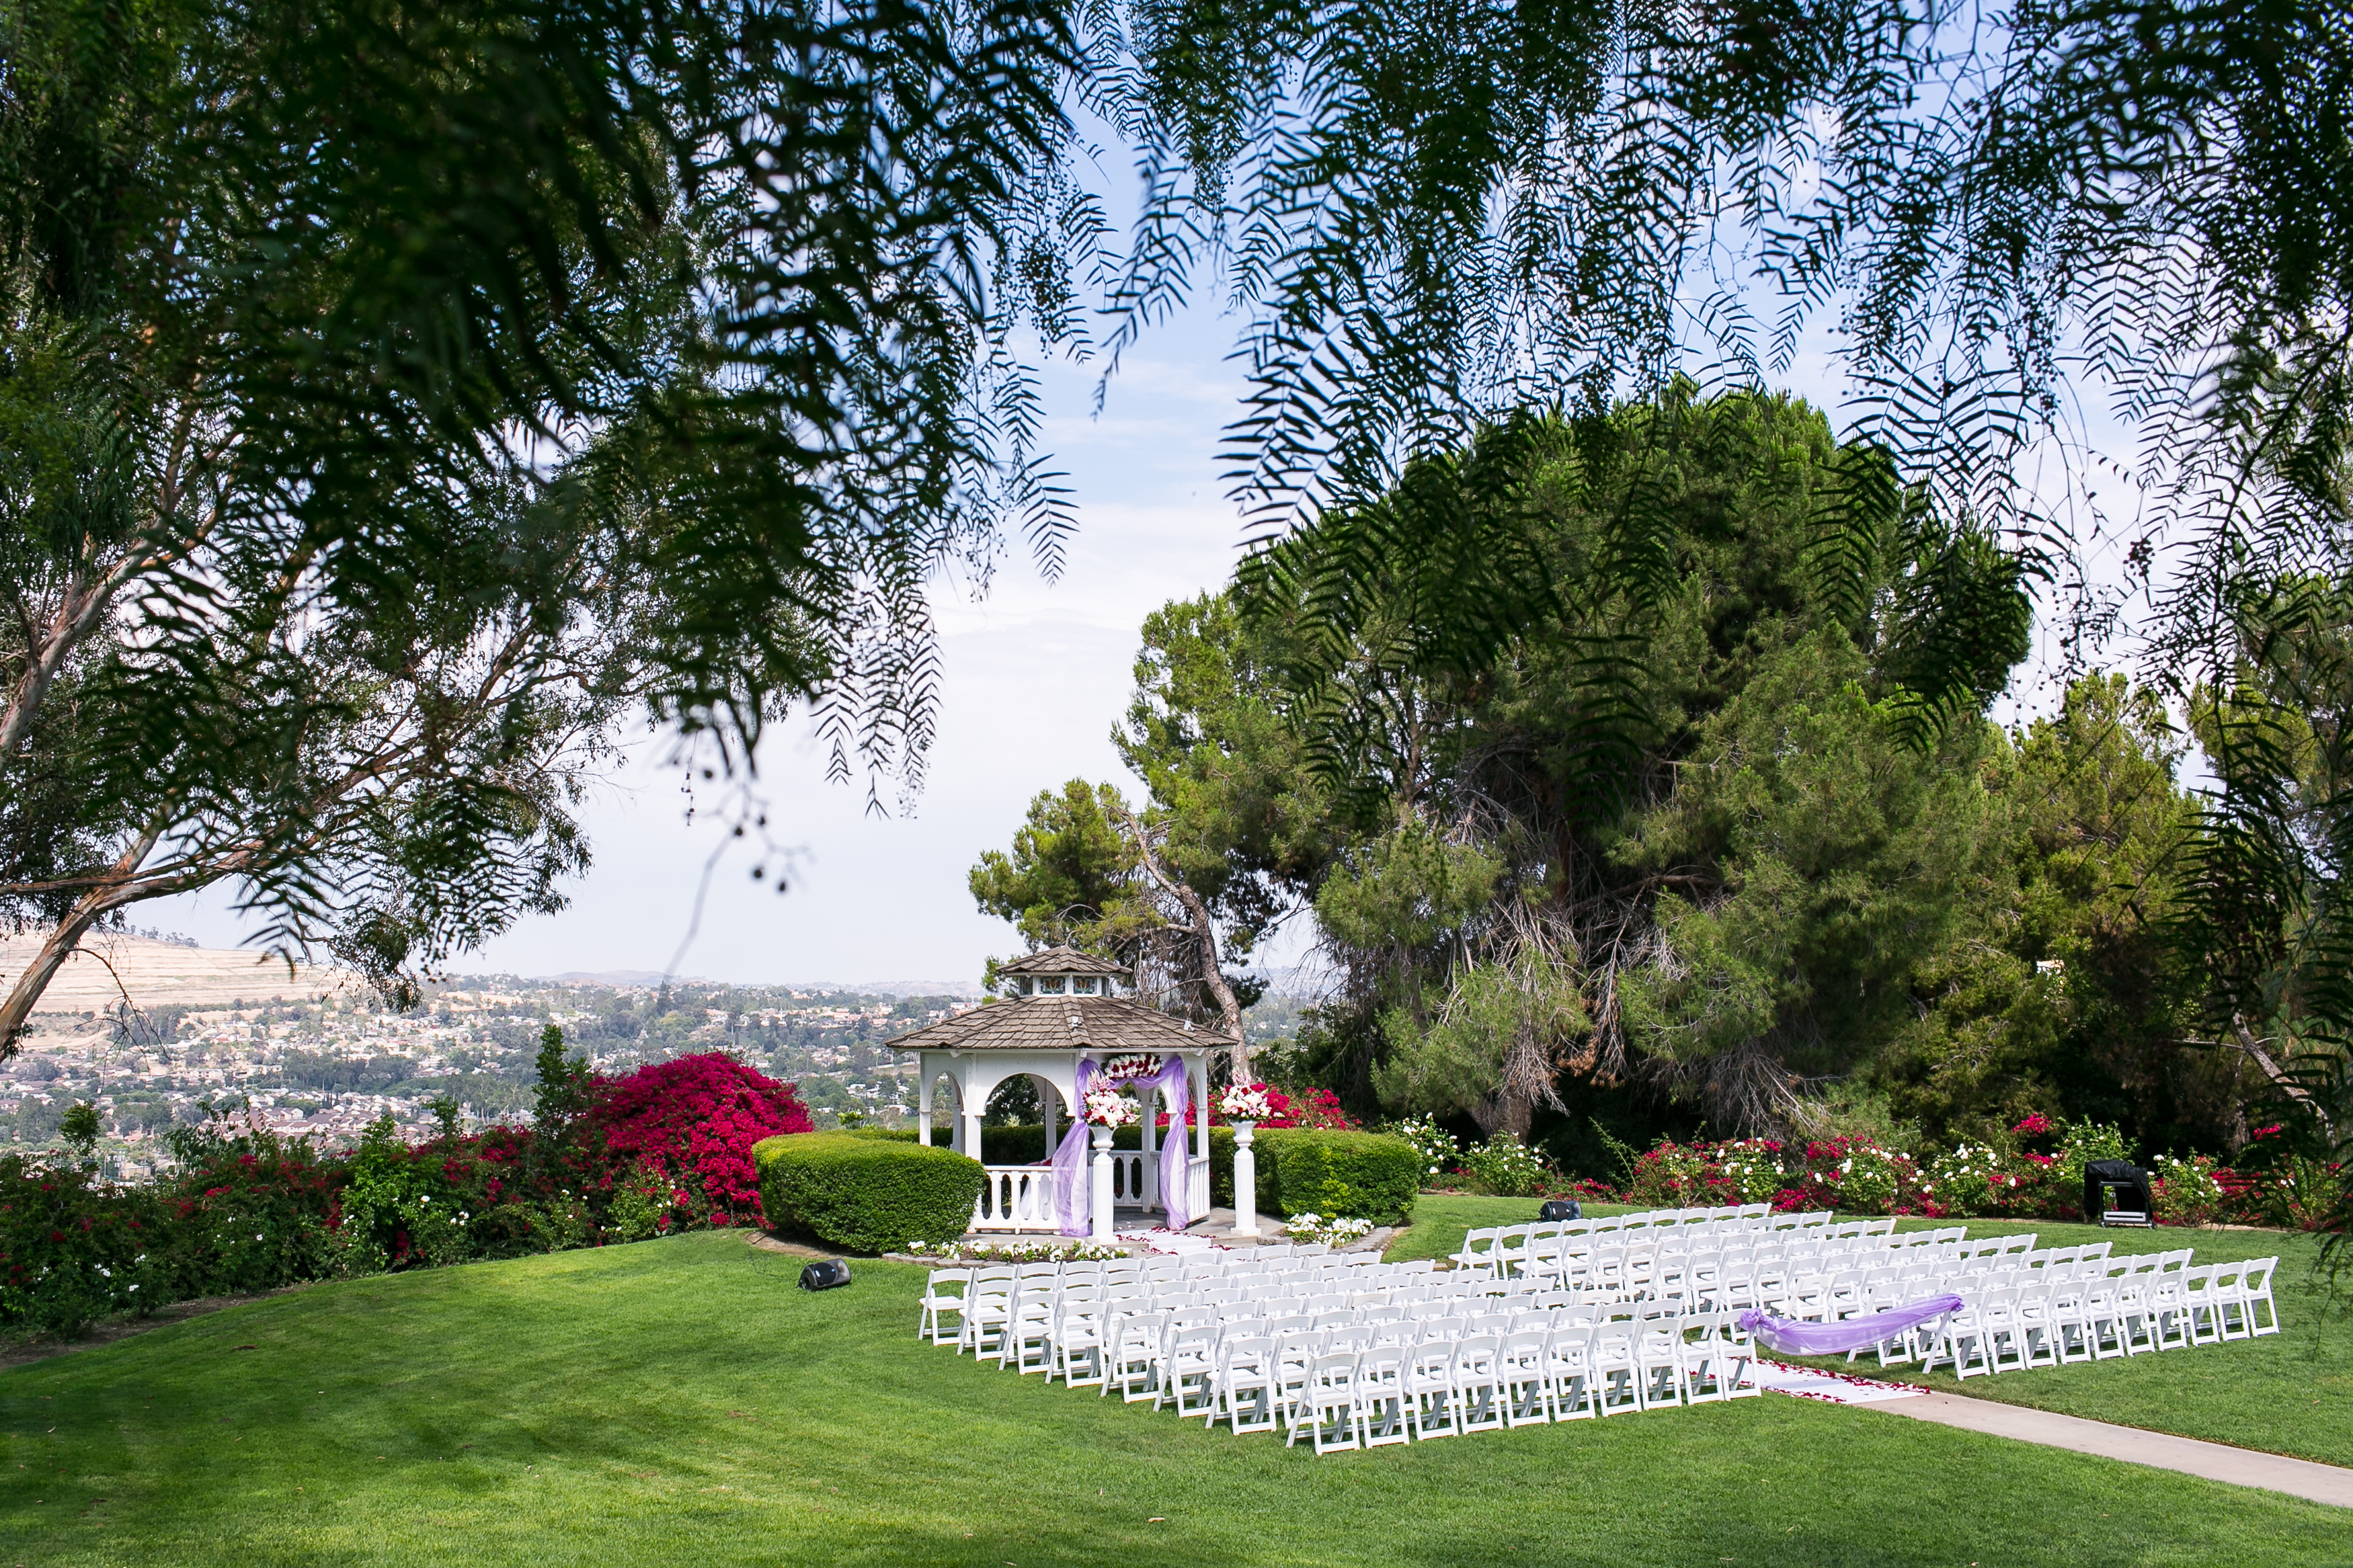 Outdoor ceremony site in grass surrounded by trees overlooking city